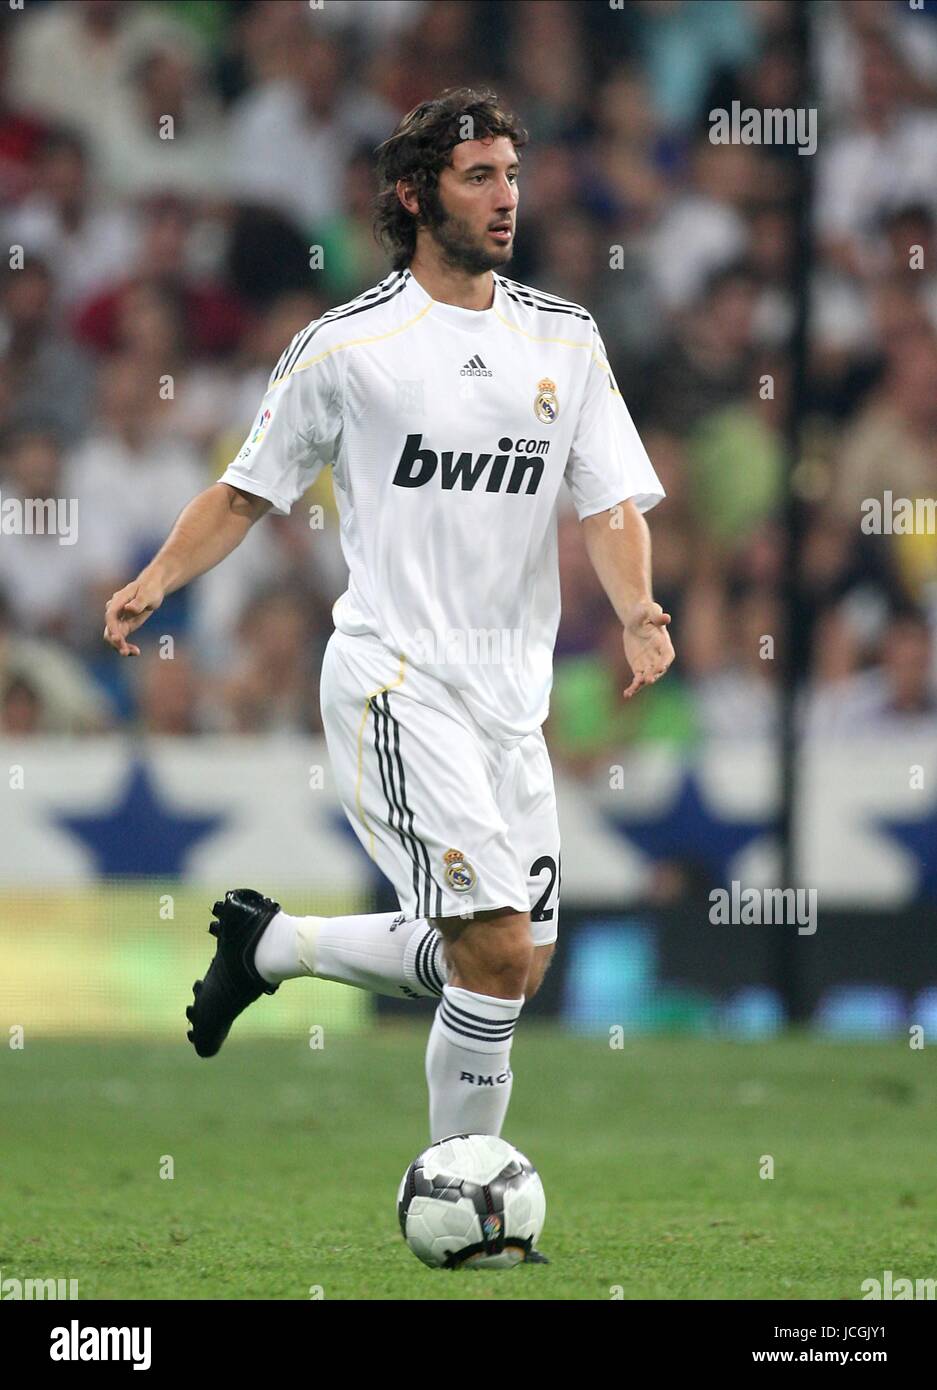 ESTEBAN GRANERO REAL MADRID CF REAL MADRID, LA LIGA SANTIAGO BERNABEU, MADRID, SPAIN 29 August 2009 DIZ102262     WARNING! This Photograph May Only Be Used For Newspaper And/Or Magazine Editorial Purposes. May Not Be Used For, Internet/Online Usage Nor For Publications Involving 1 player, 1 Club Or 1 Competition, Without Written Authorisation From Football DataCo Ltd. For Any Queries, Please Contact Football DataCo Ltd on +44 (0) 207 864 9121 Stock Photo